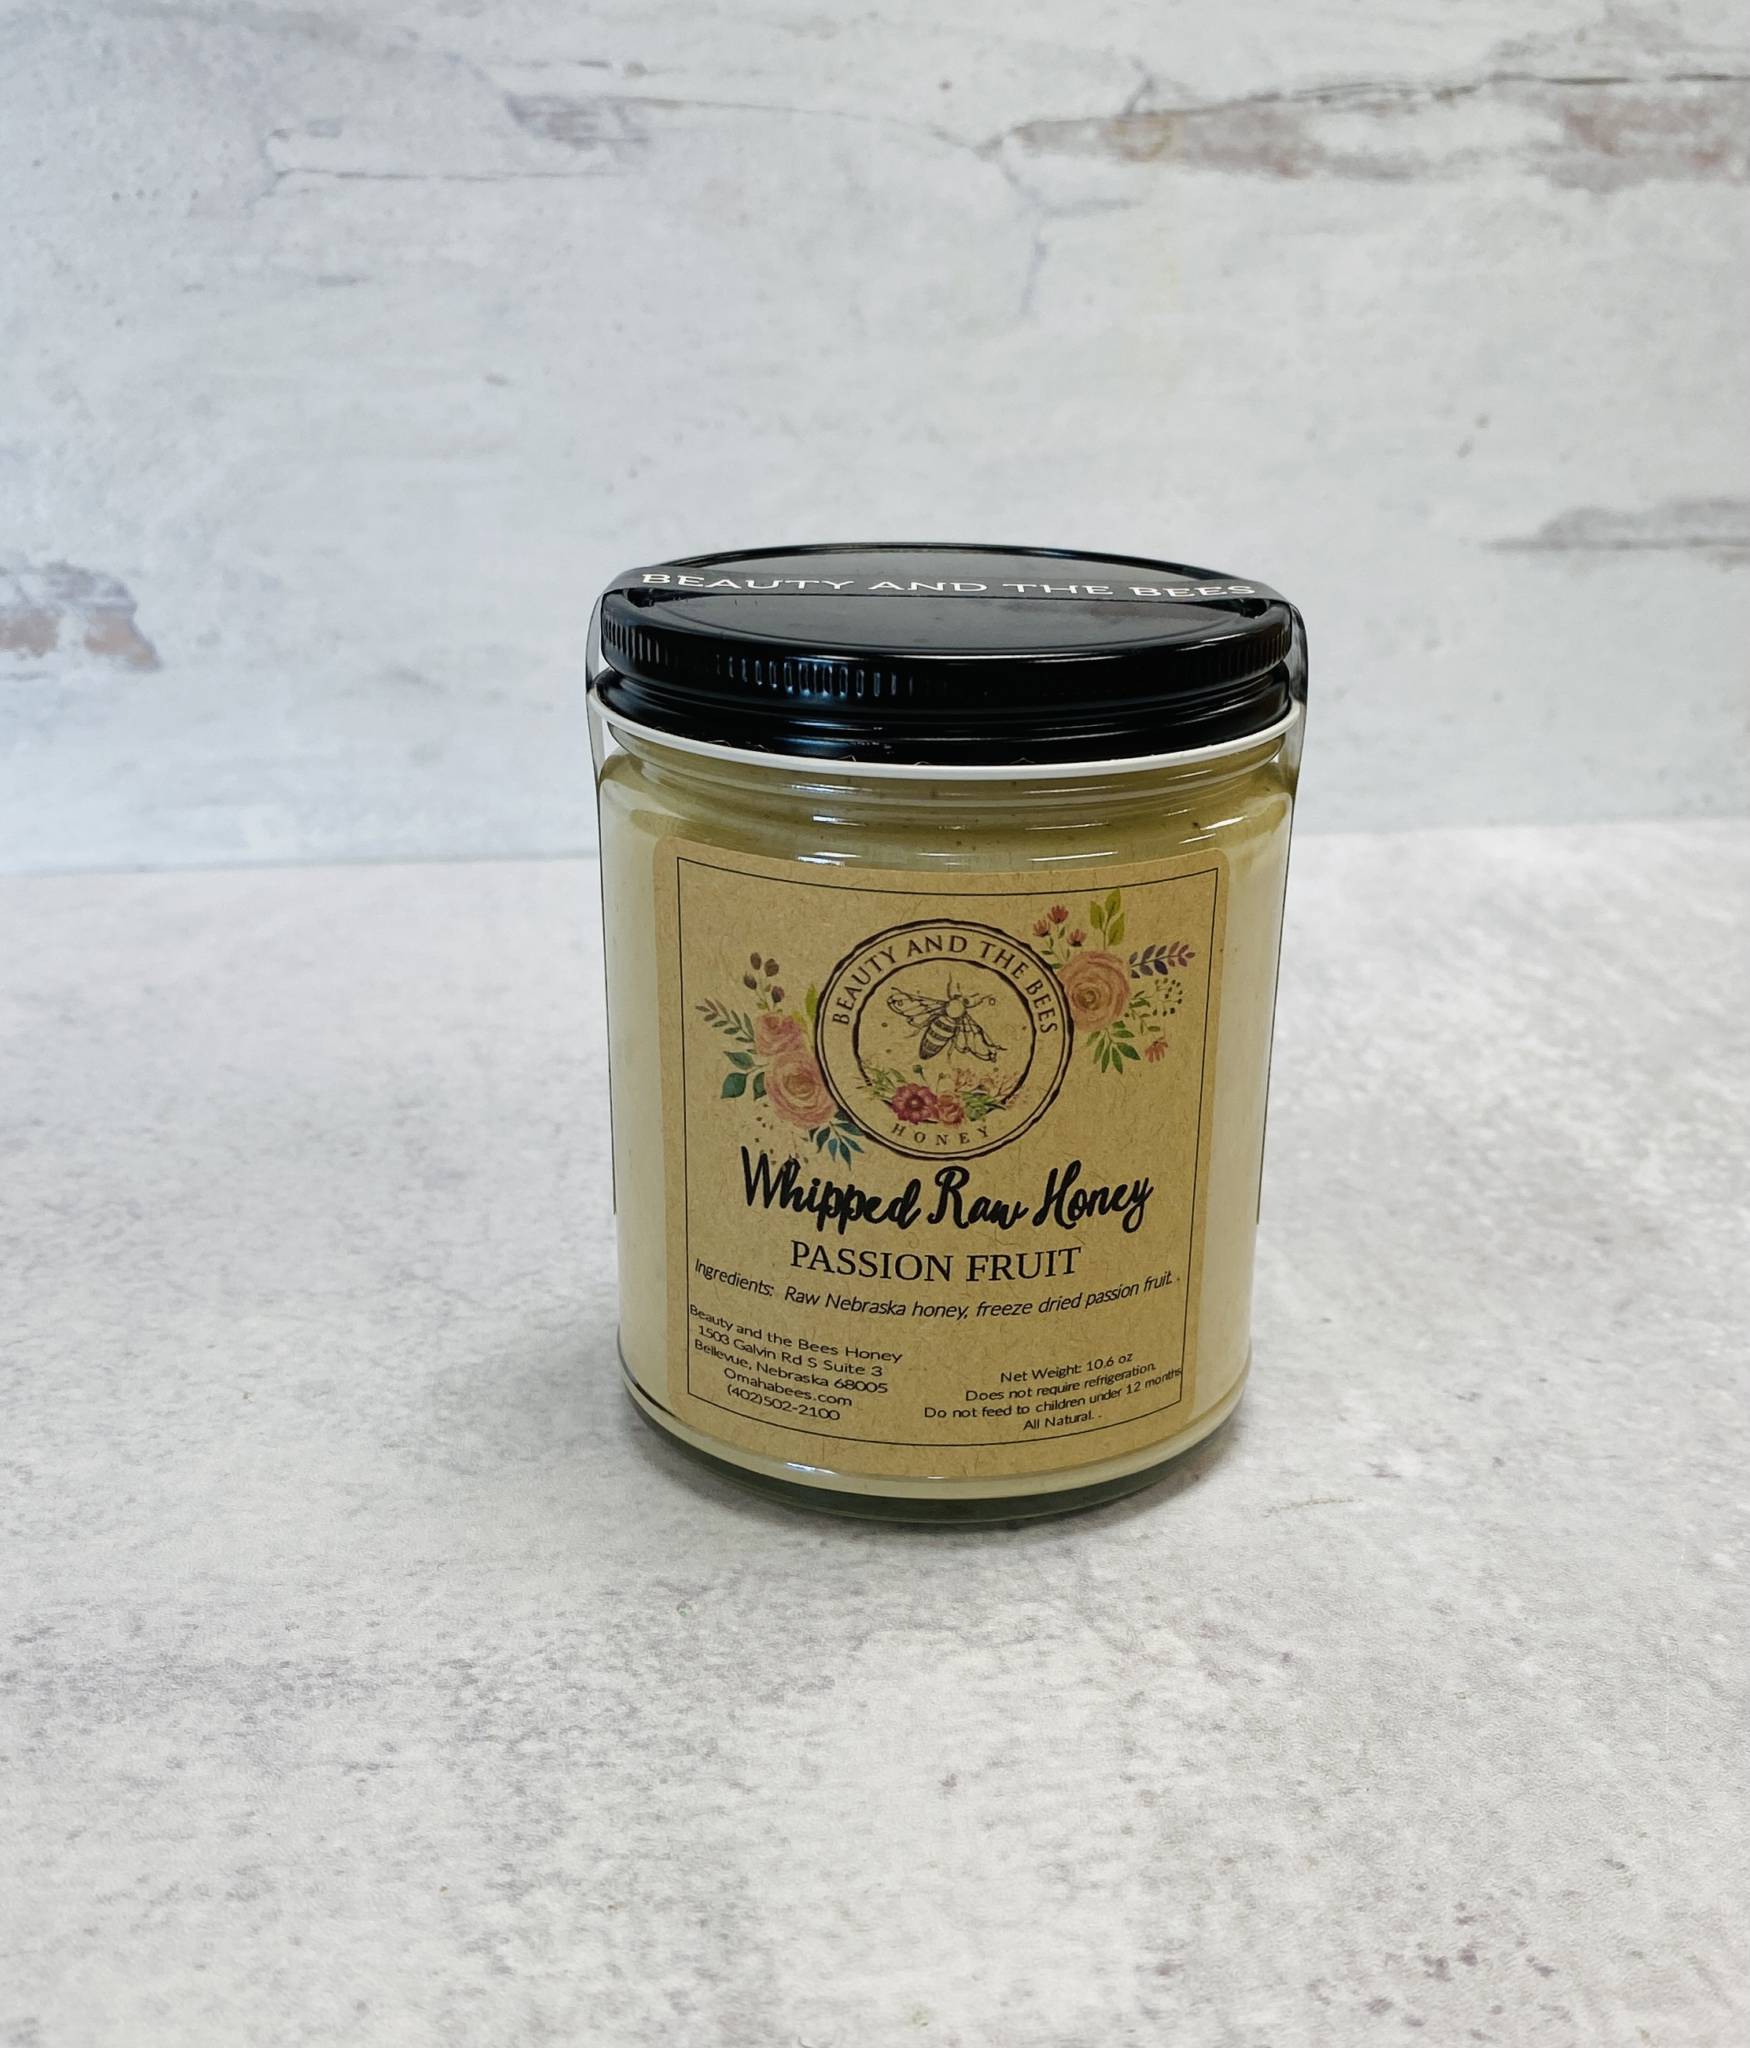 Passion Fruit Whipped Raw Honey 12 Pint 8 Oz Beauty And The Bees Honey Anna 90 Day Fiance 7369